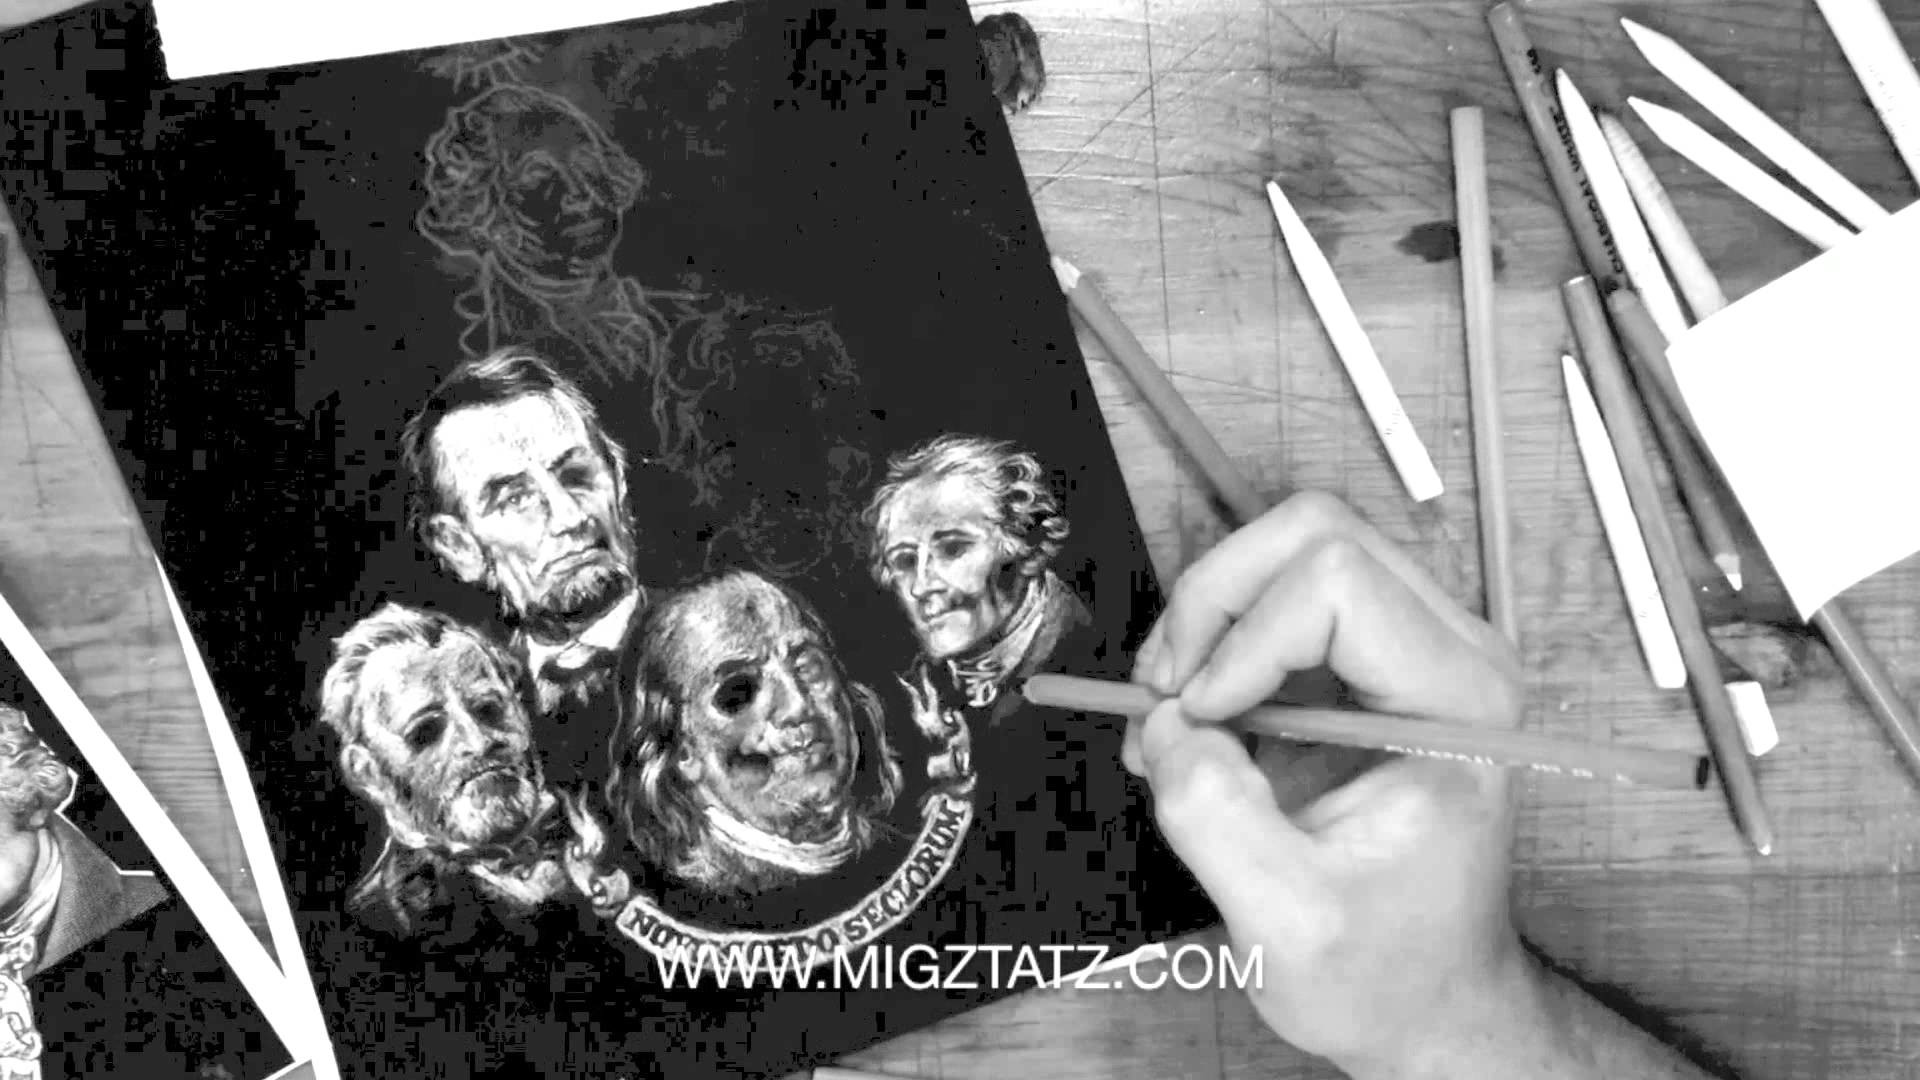 1920x1080 MIGZ TATZ: WHITE CHARCOAL SPEED DRAWING OF FACES FROM MONEY (TIME LAPSE)  DEAD PRESIDENTS